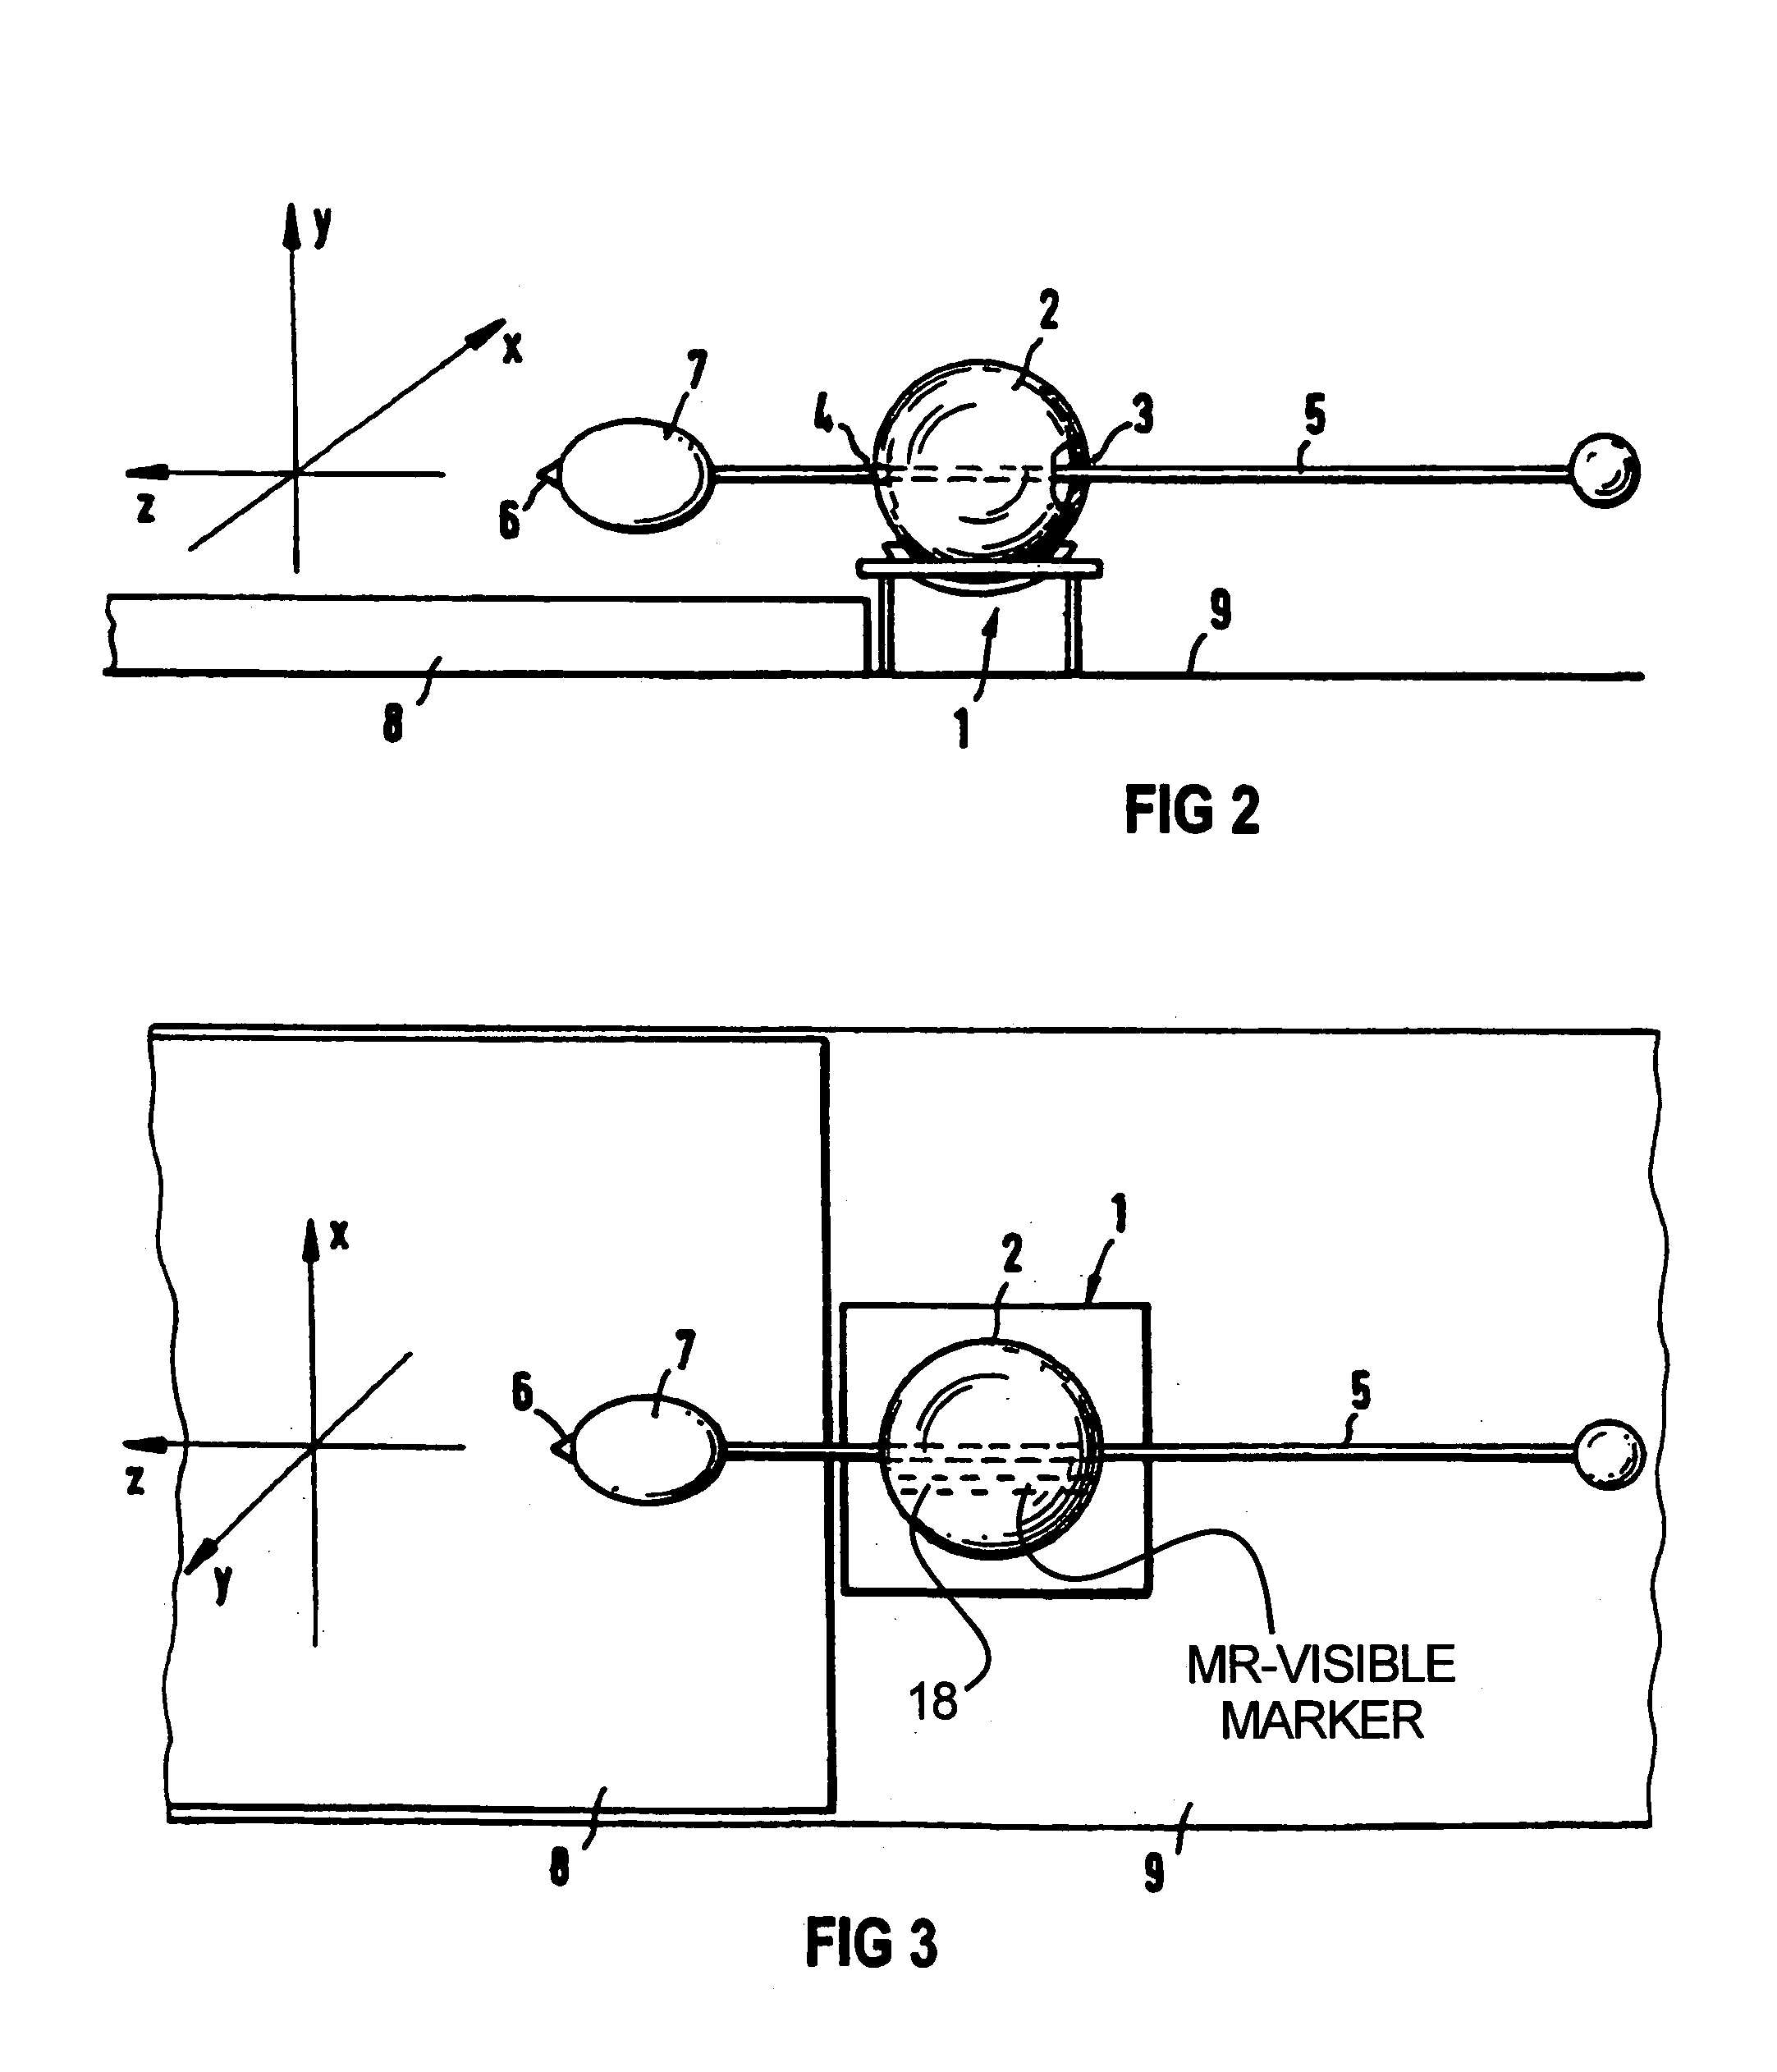 Apparatus for endorectal prostate biopsy